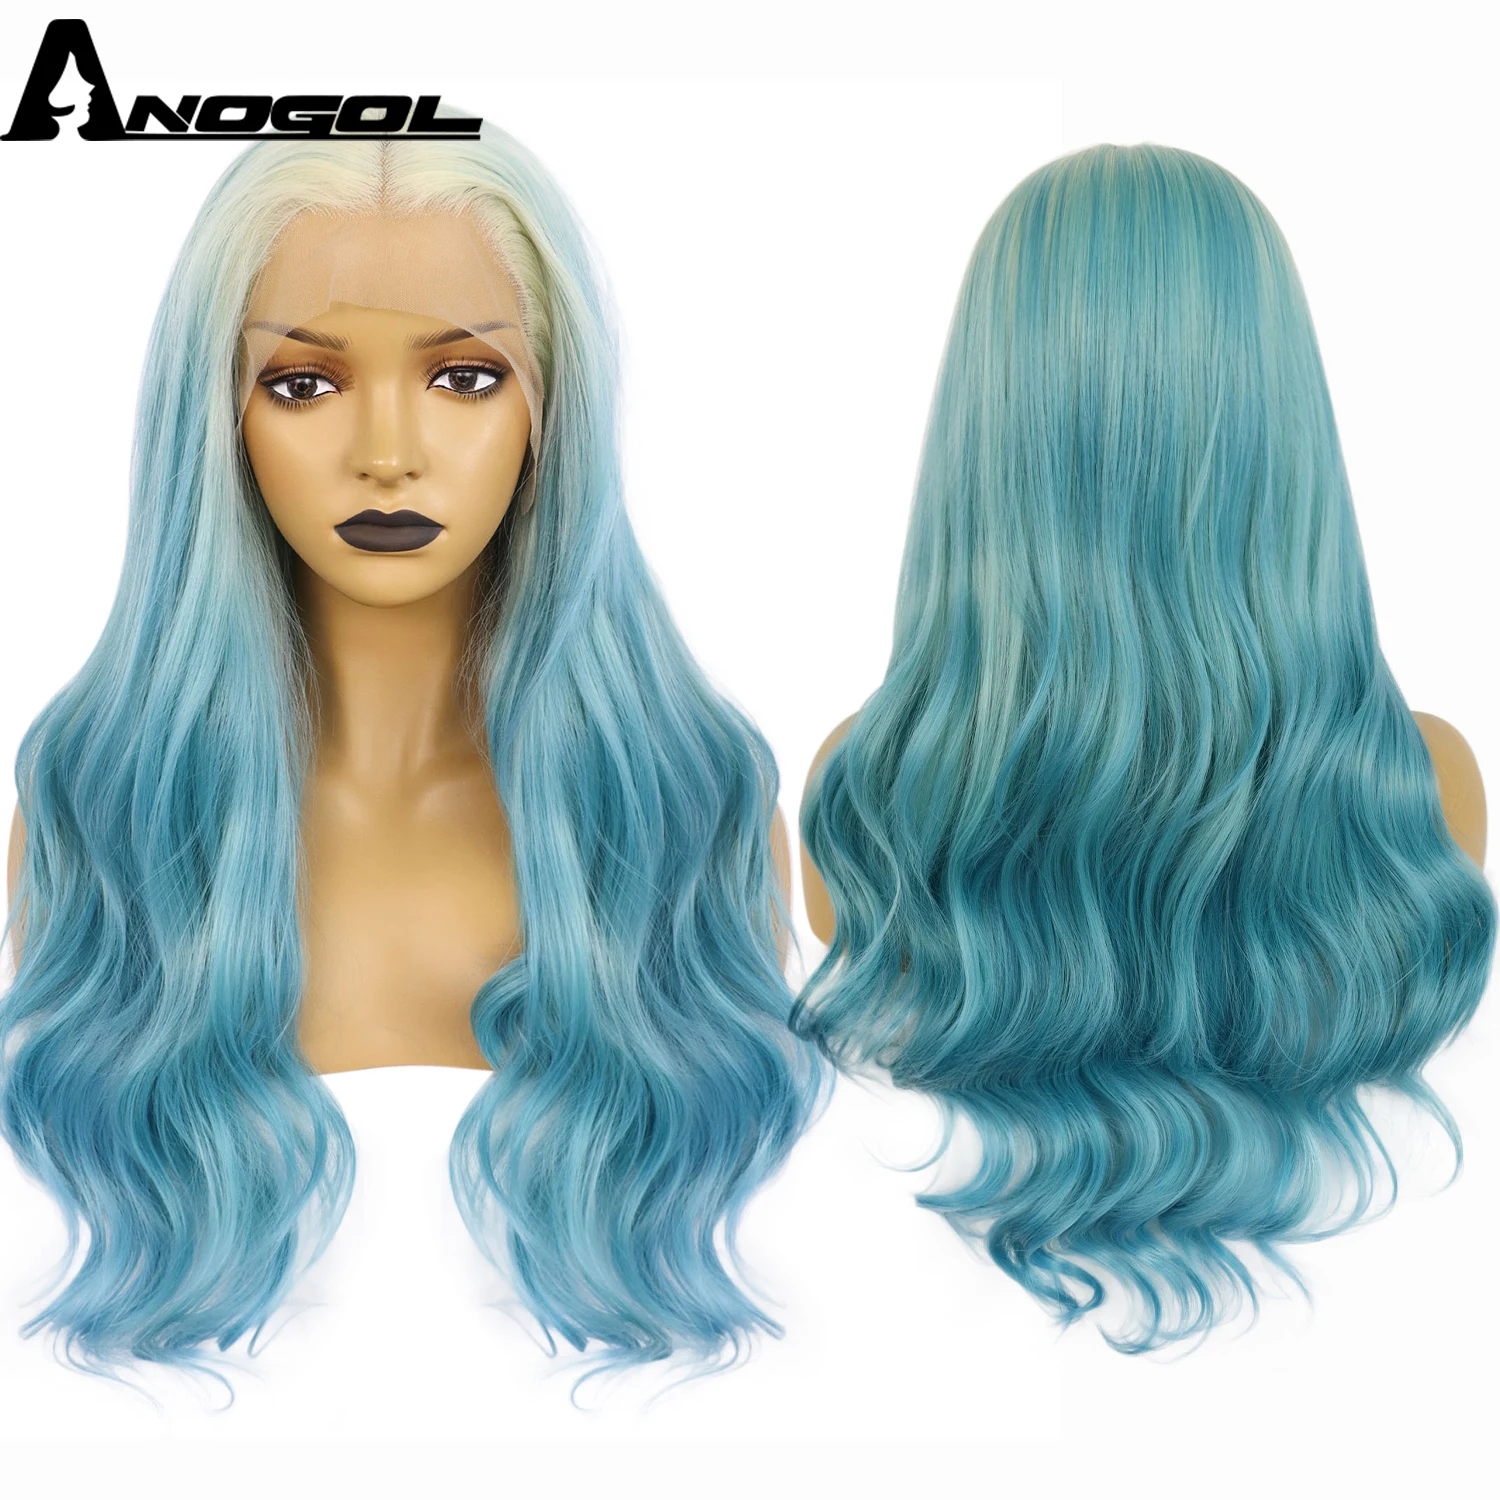 ANOGOL Synthetic Wigs 28IN/30IN 13X4 Lace Front Wigs Light Blue White Long Wave Ombre Blonde Lolita Natural Wavy Wig for Women